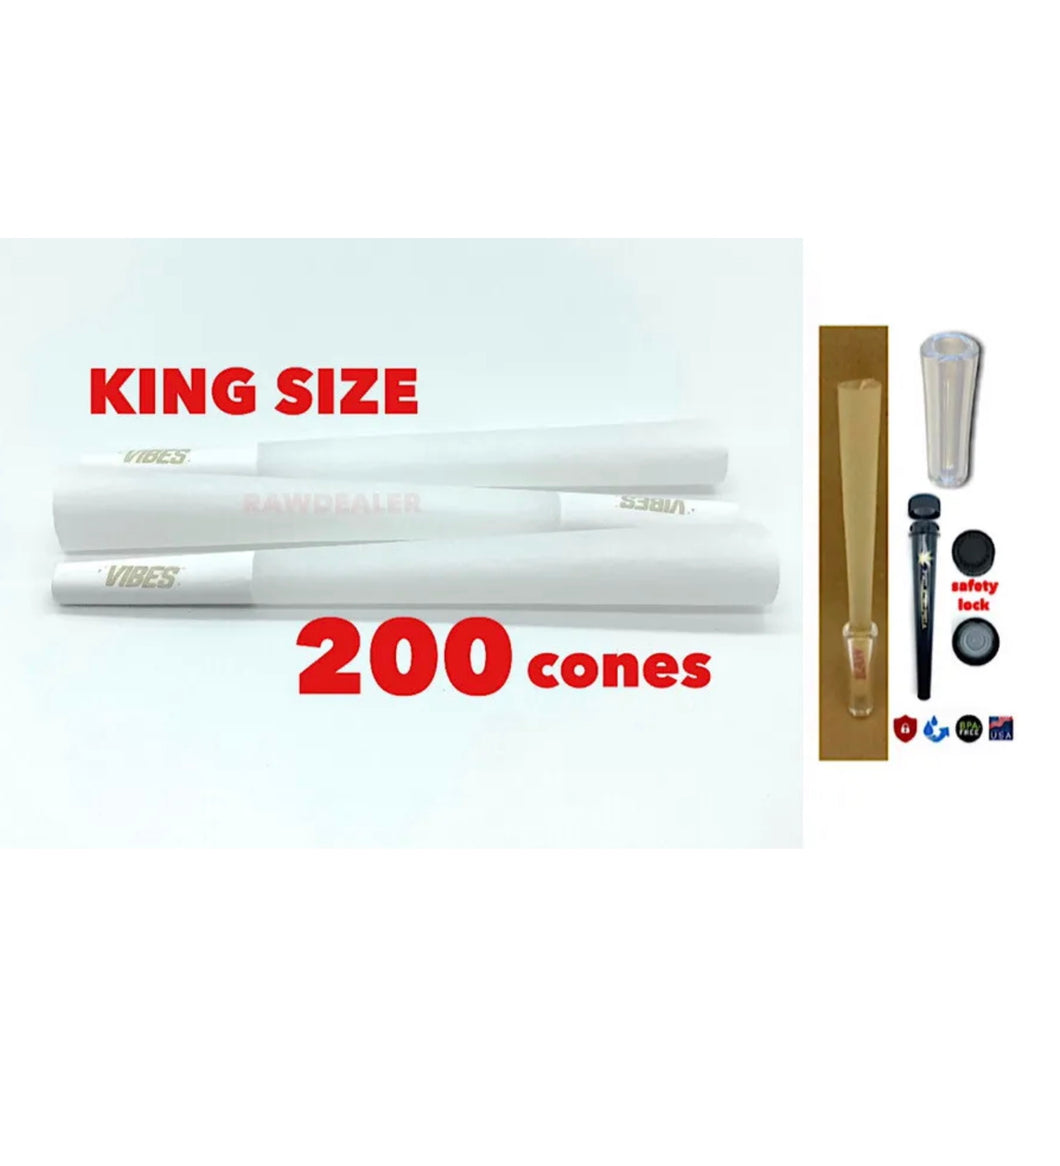 vibes hemp pre rolled cone king size +glass cone tip+ smell proof tube